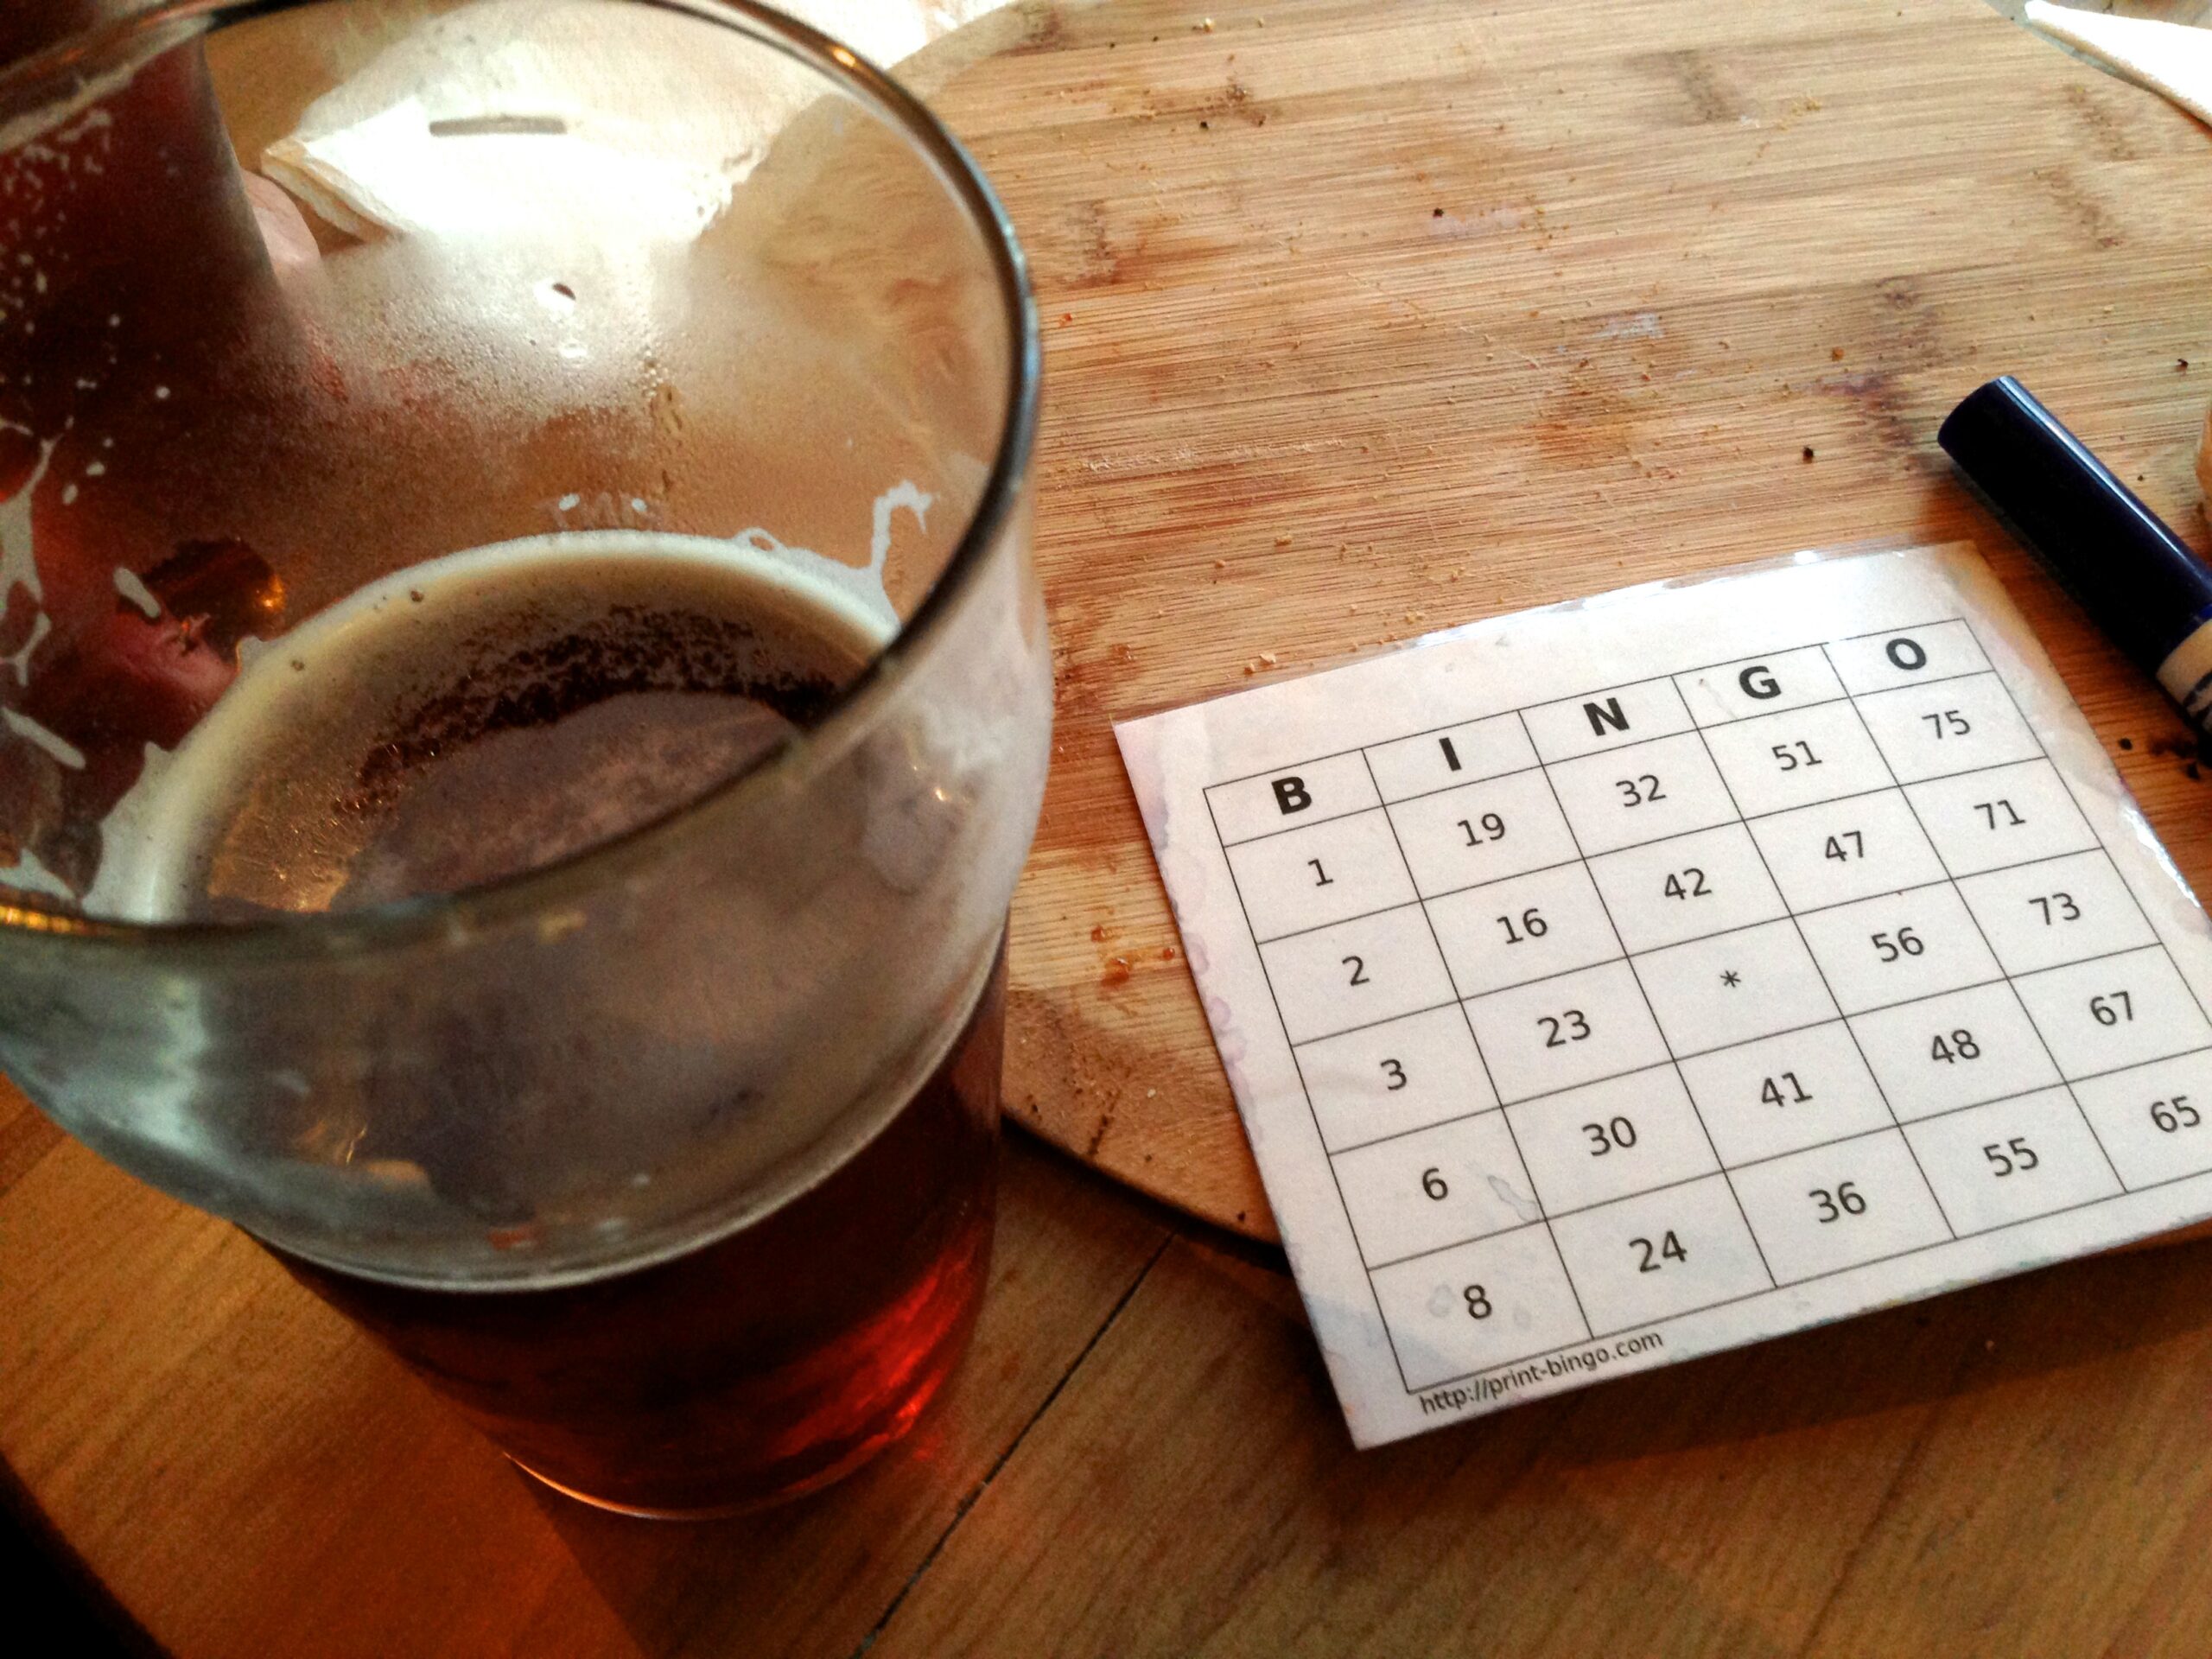 Geek insider, geekinsider, geekinsider. Com,, where and how can you play bingo online? , entertainment